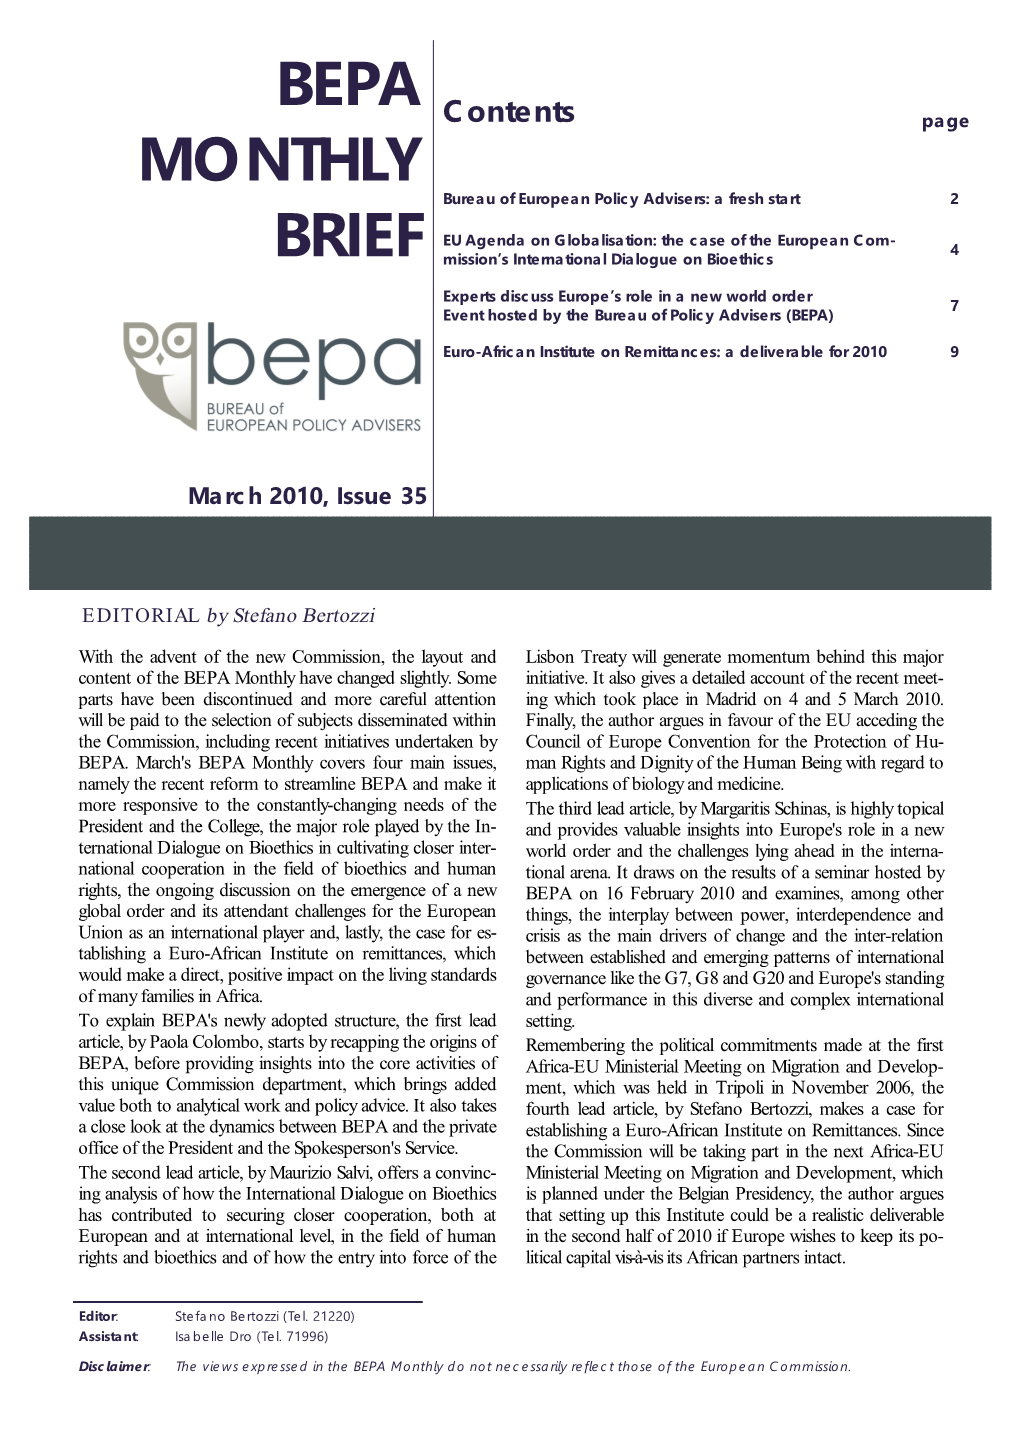 BEPA Monthly Brief - March 2010, Issue 35 1 Bureau of European Policy Advisers: a Fresh Start by Paola Colombo